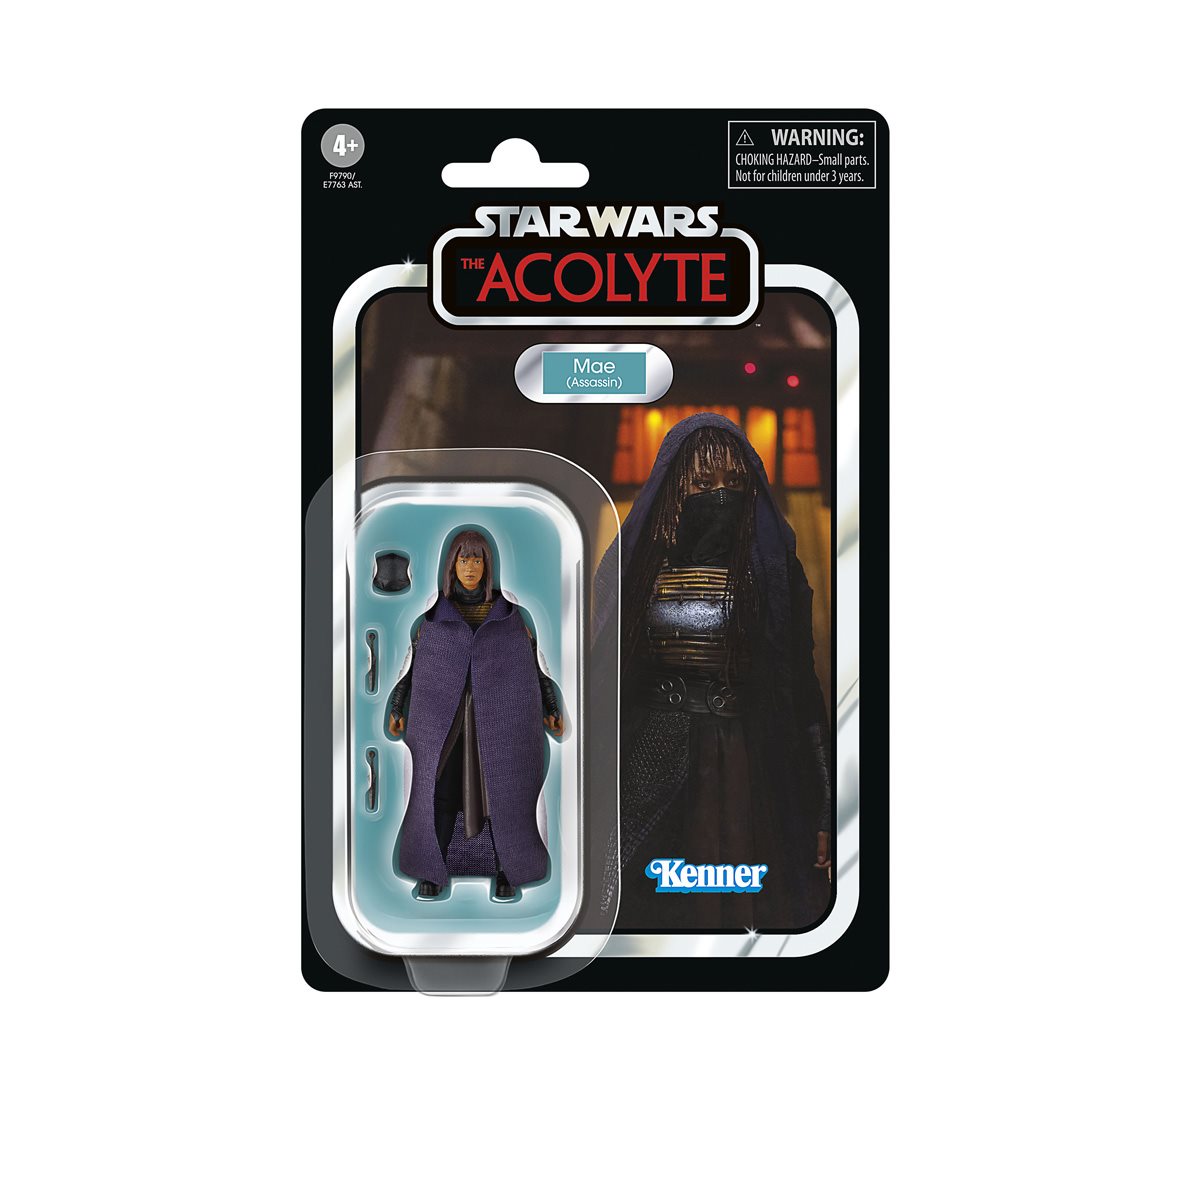  Star Wars The Vintage Collection 3 3/4-Inch Mae (Assassin) Action Figure  HSF9790 5010996226952